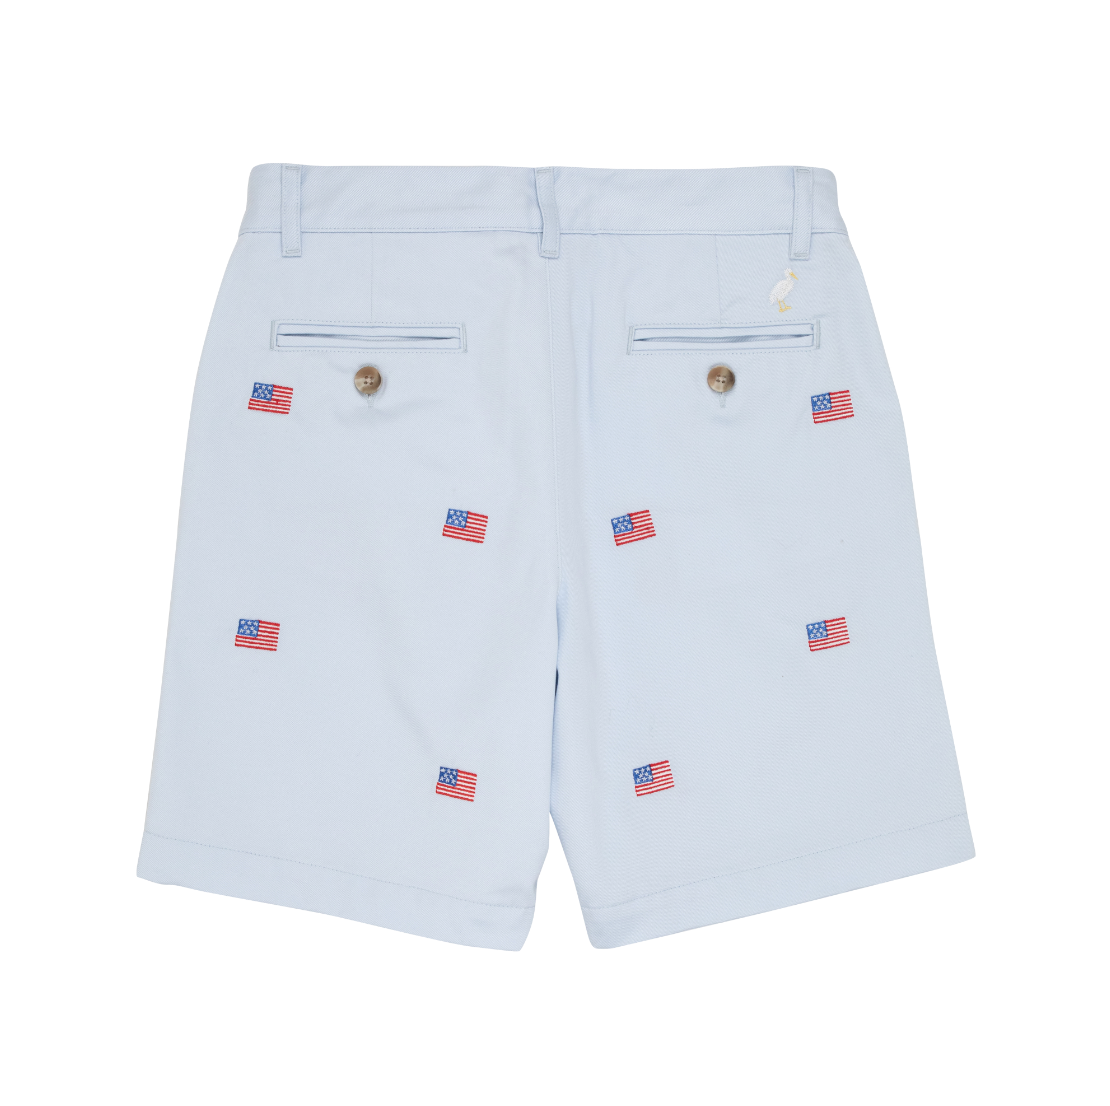 Critter Charlie's Chinos - Buckhead Blue/Multicolor/American Flags